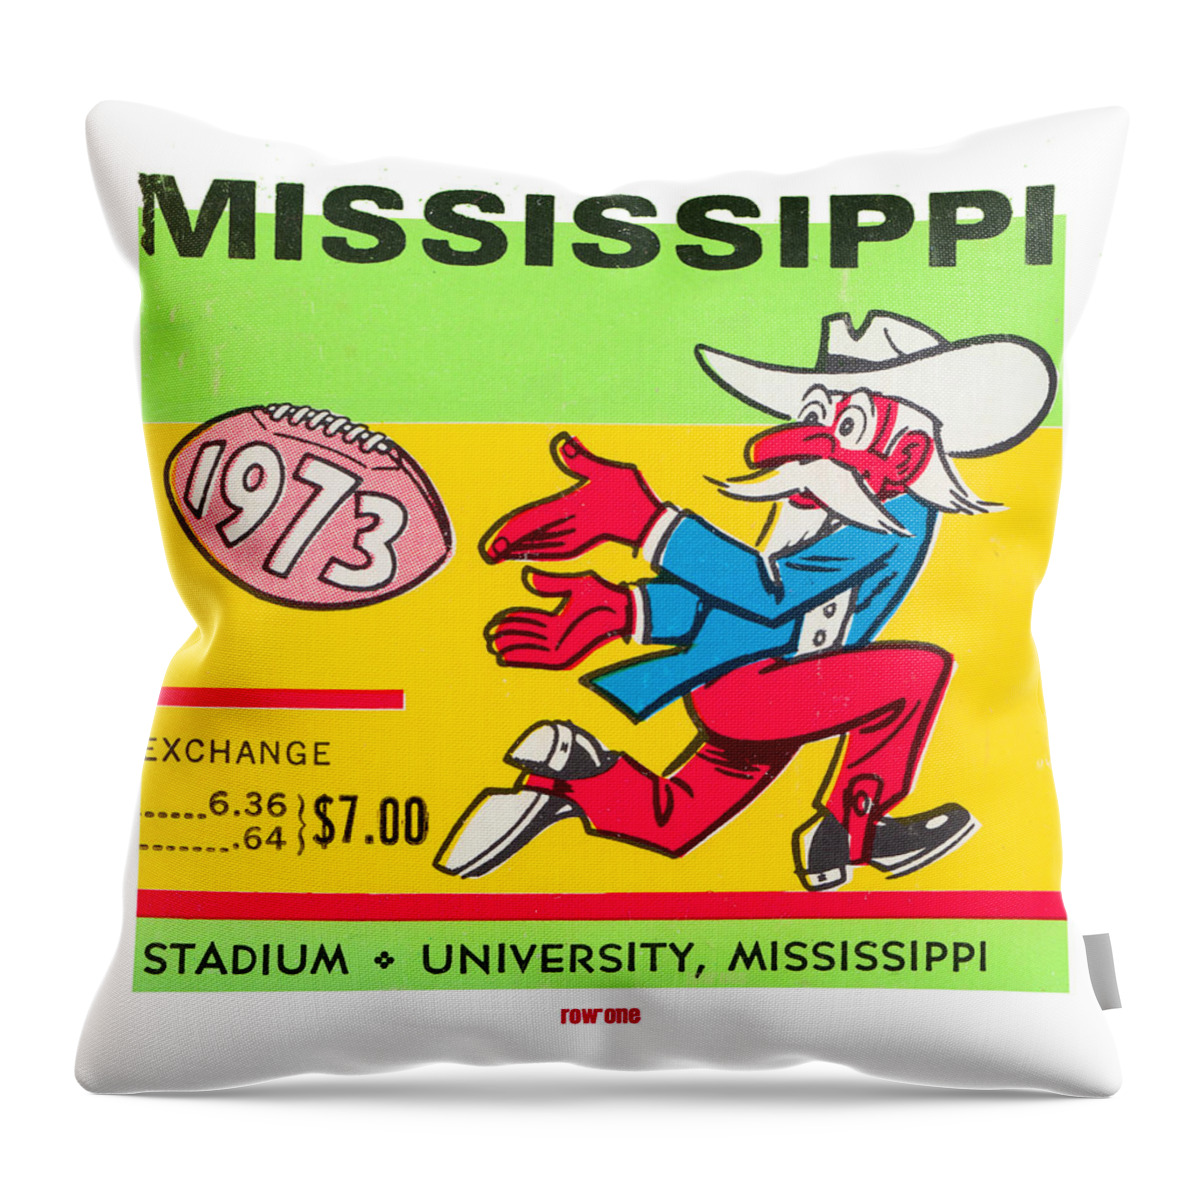 Mississippi Throw Pillow featuring the mixed media 1973 Ole Miss by Row One Brand